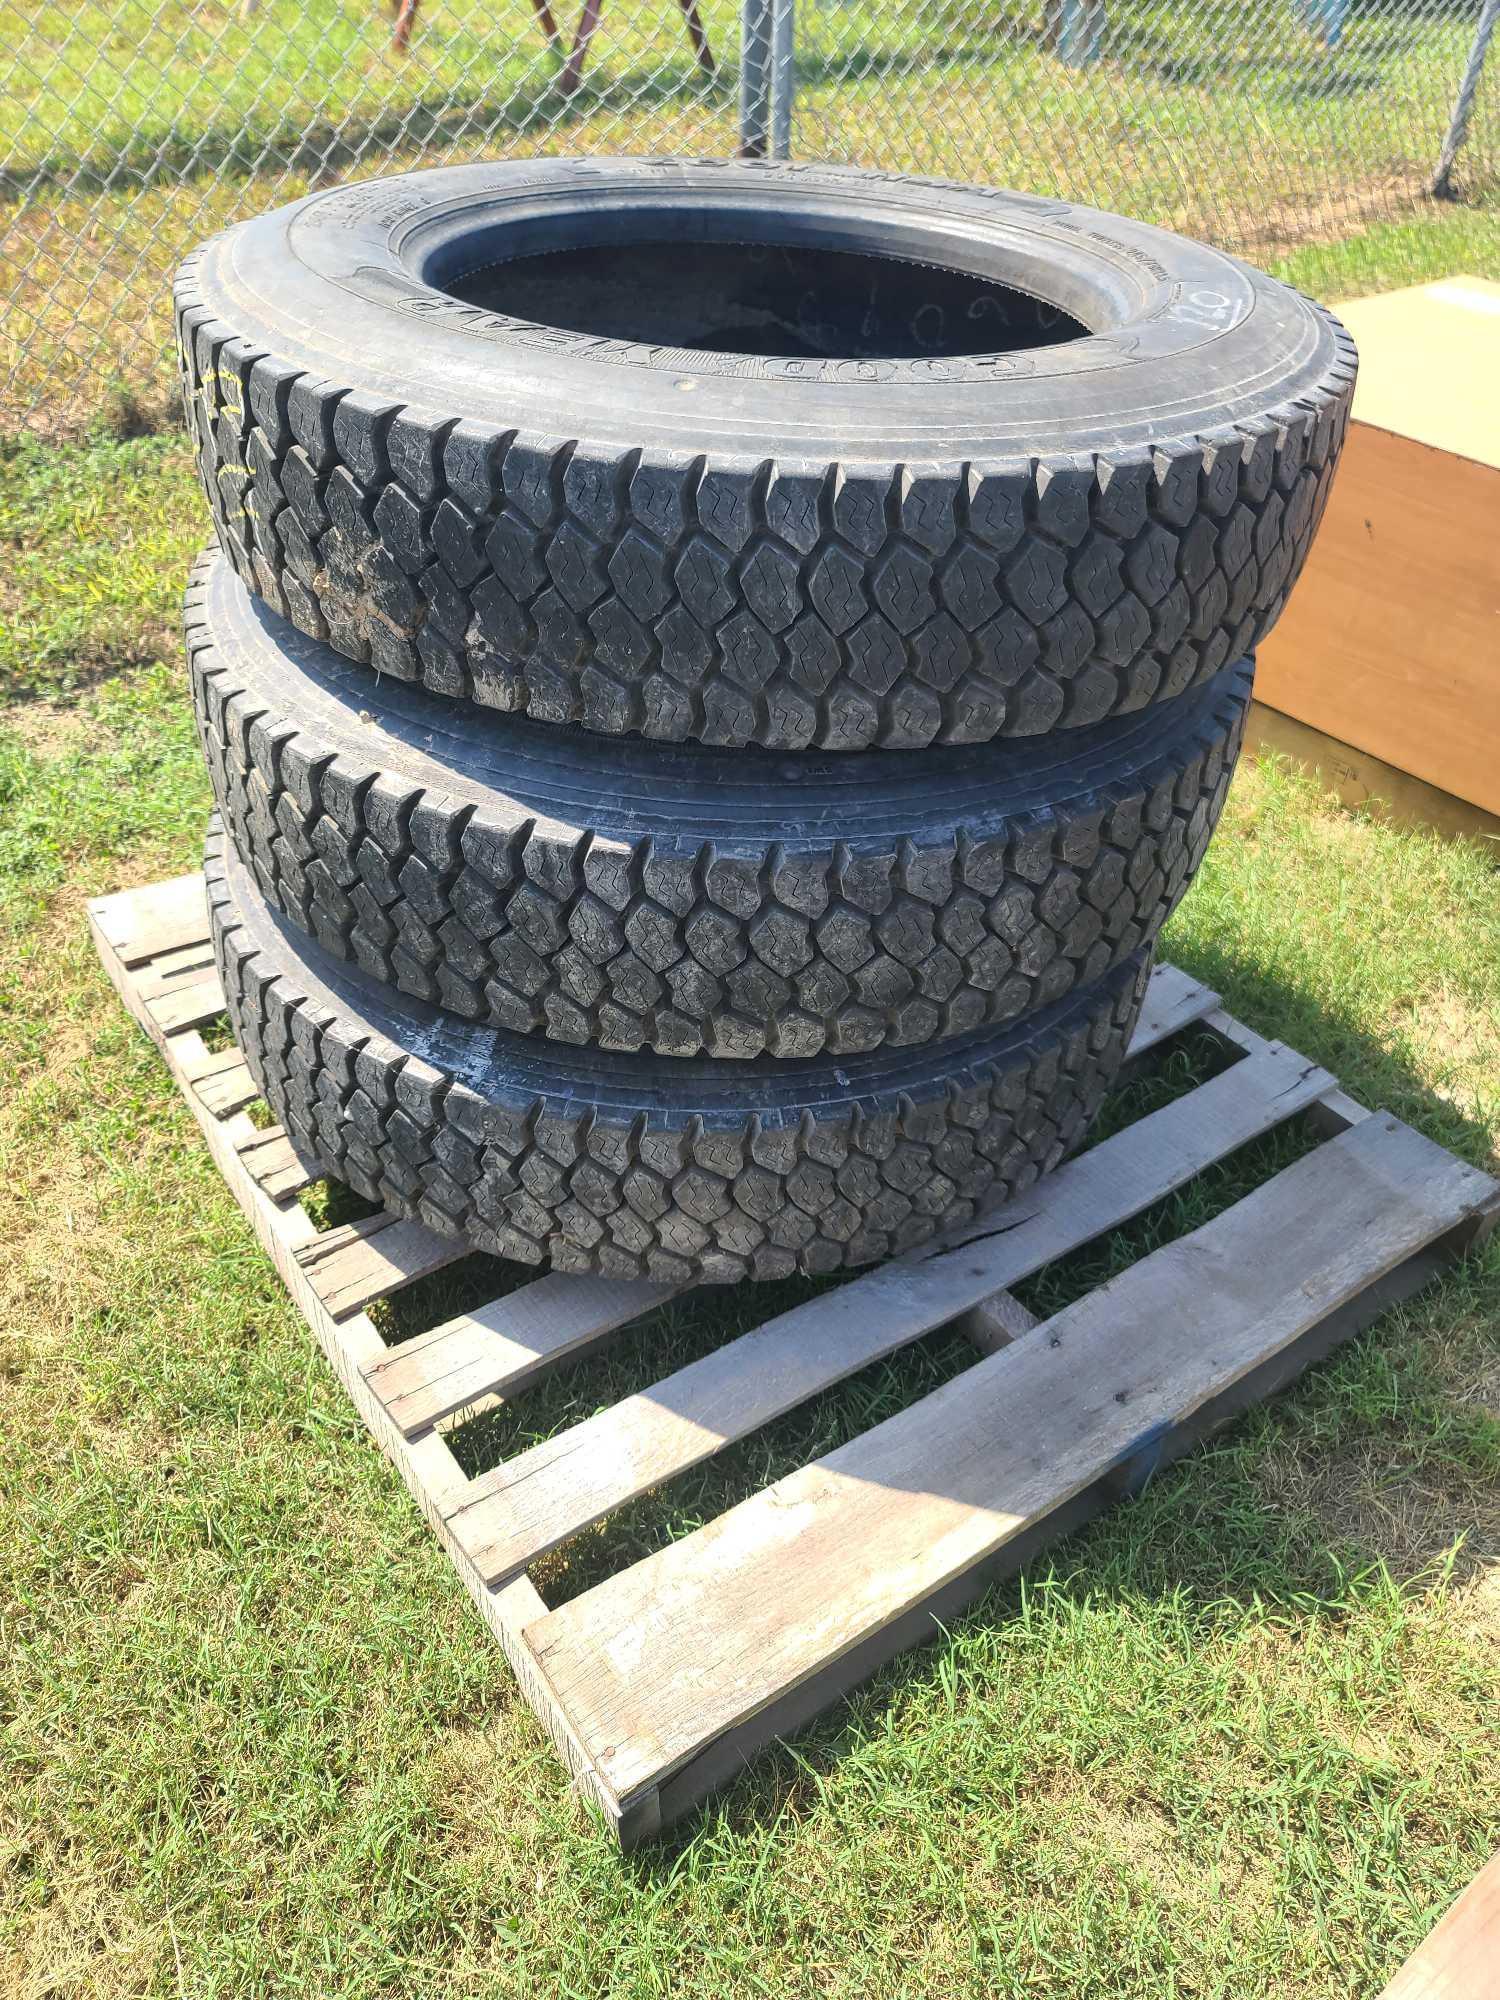 (6) GoodYear Tires 245/75R225 134/132L on 2 Pallets